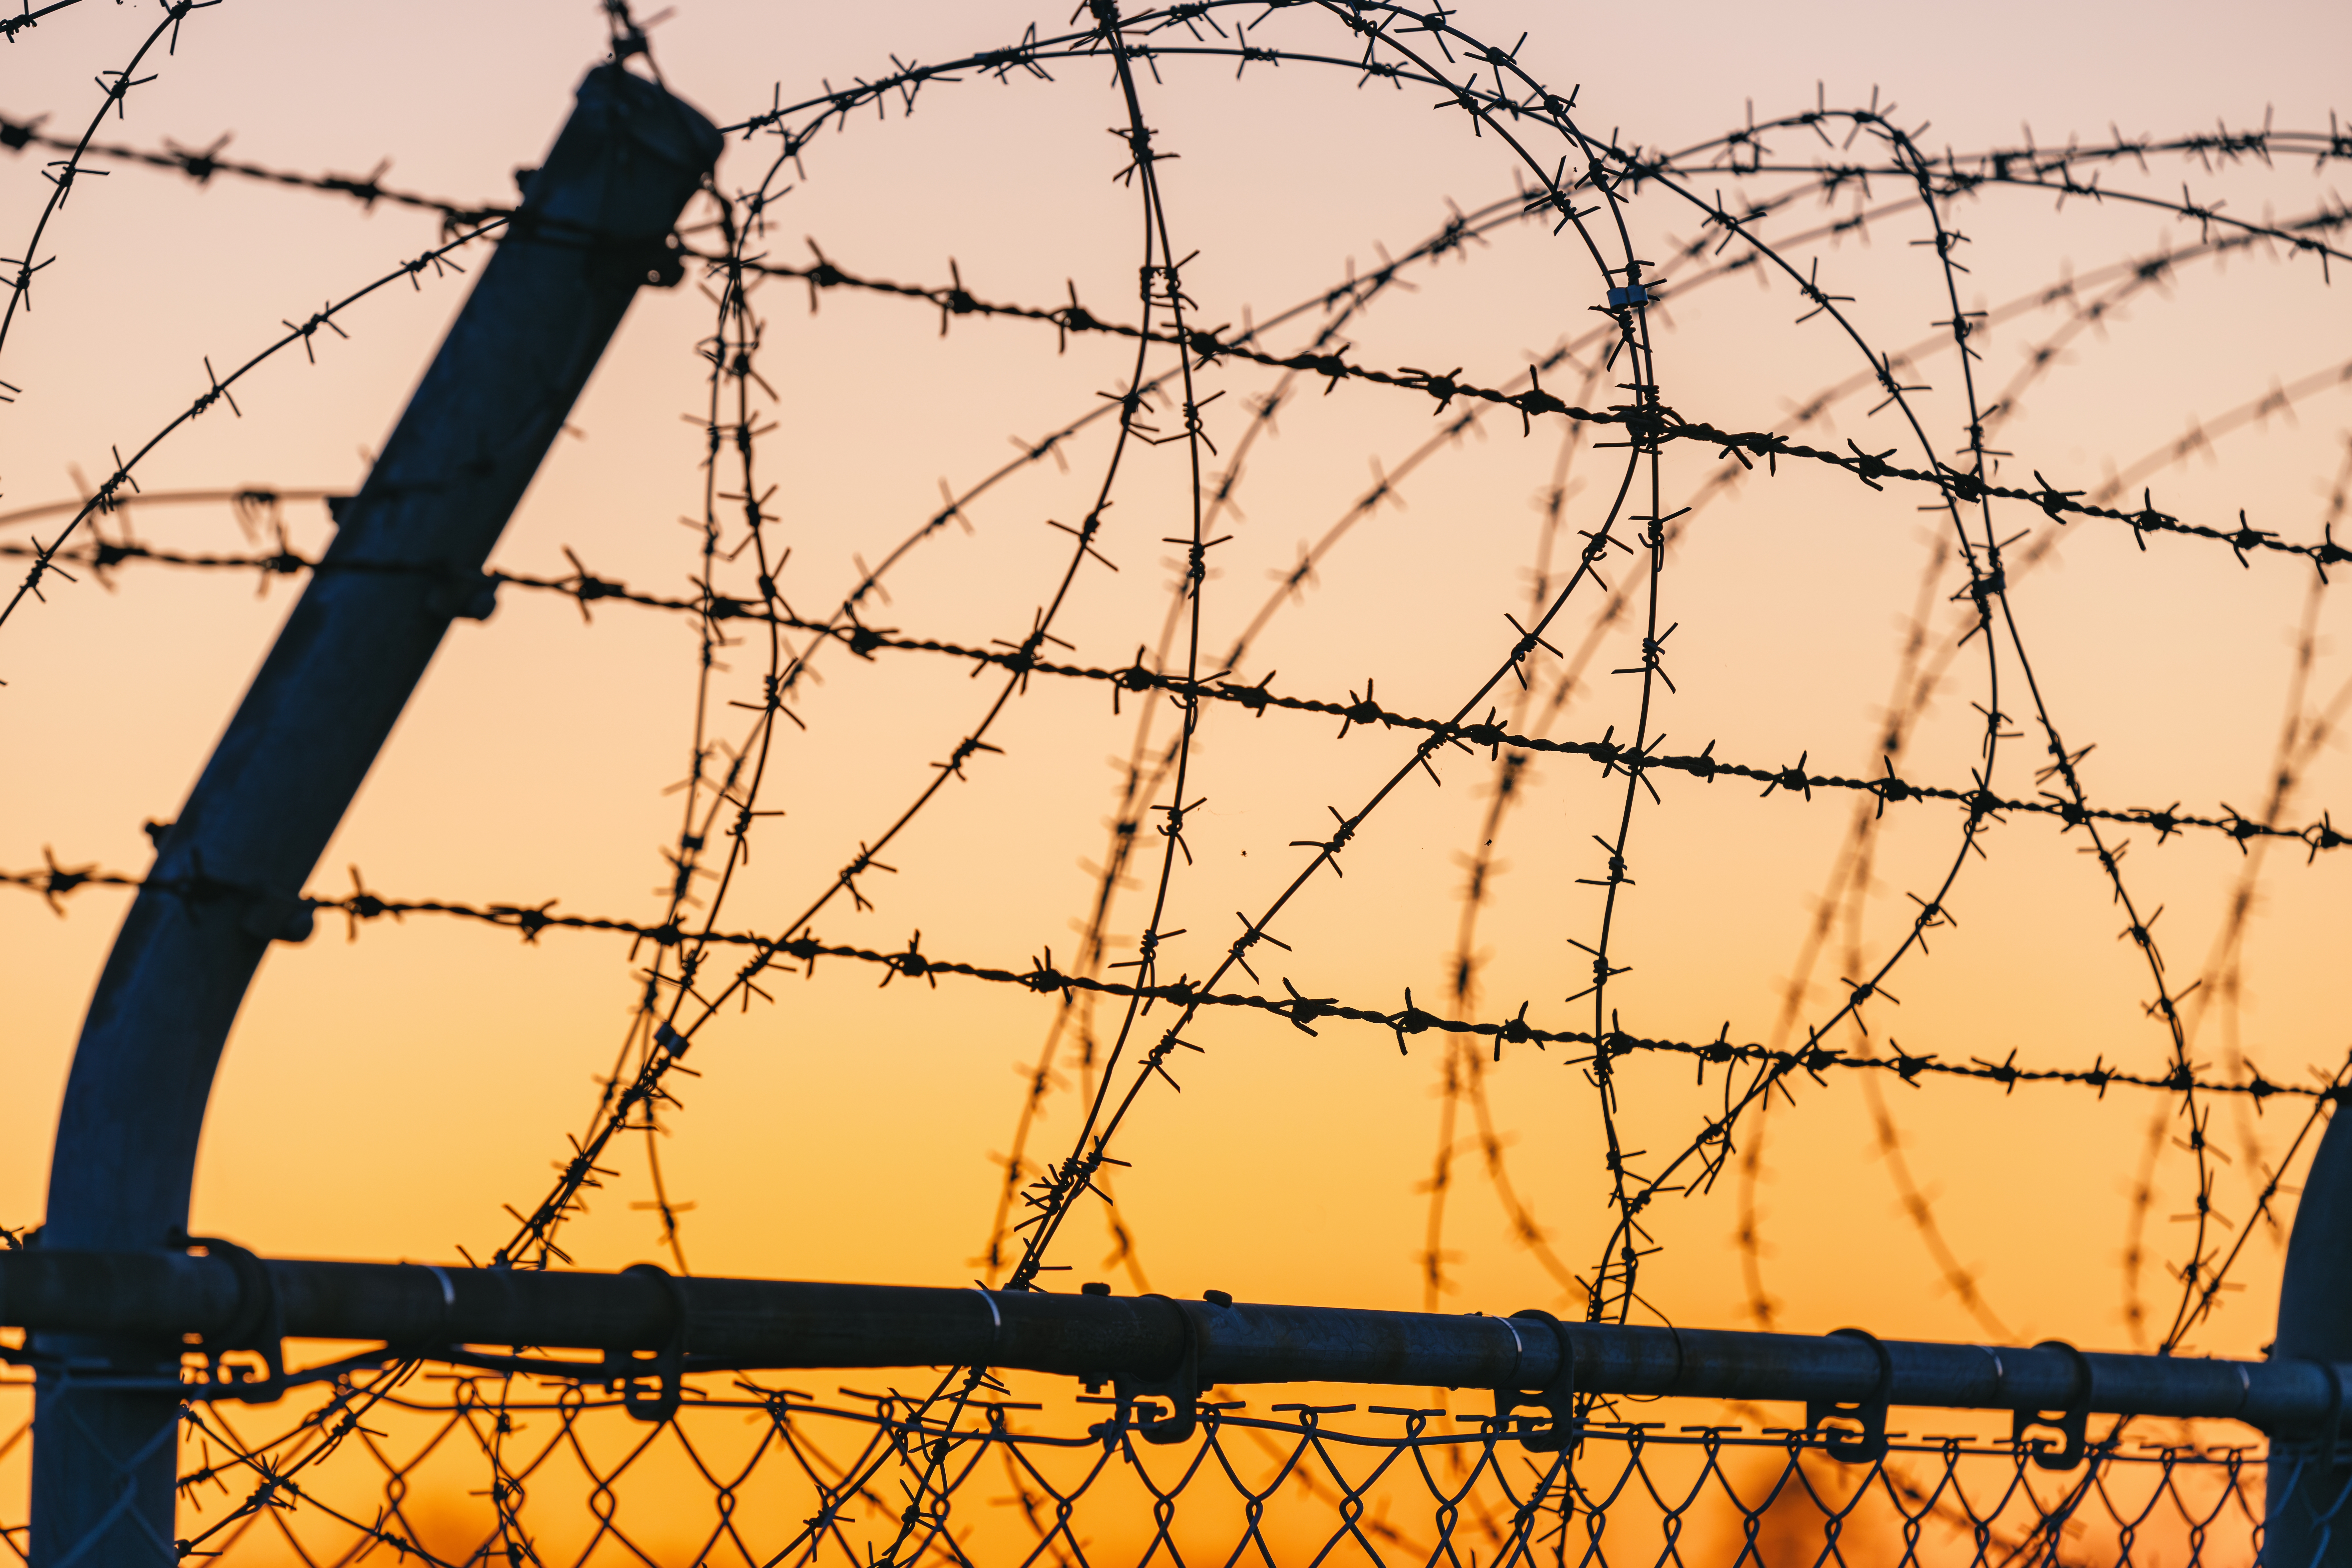 Sunset sky and barbed wire. | Source: Shutterstock